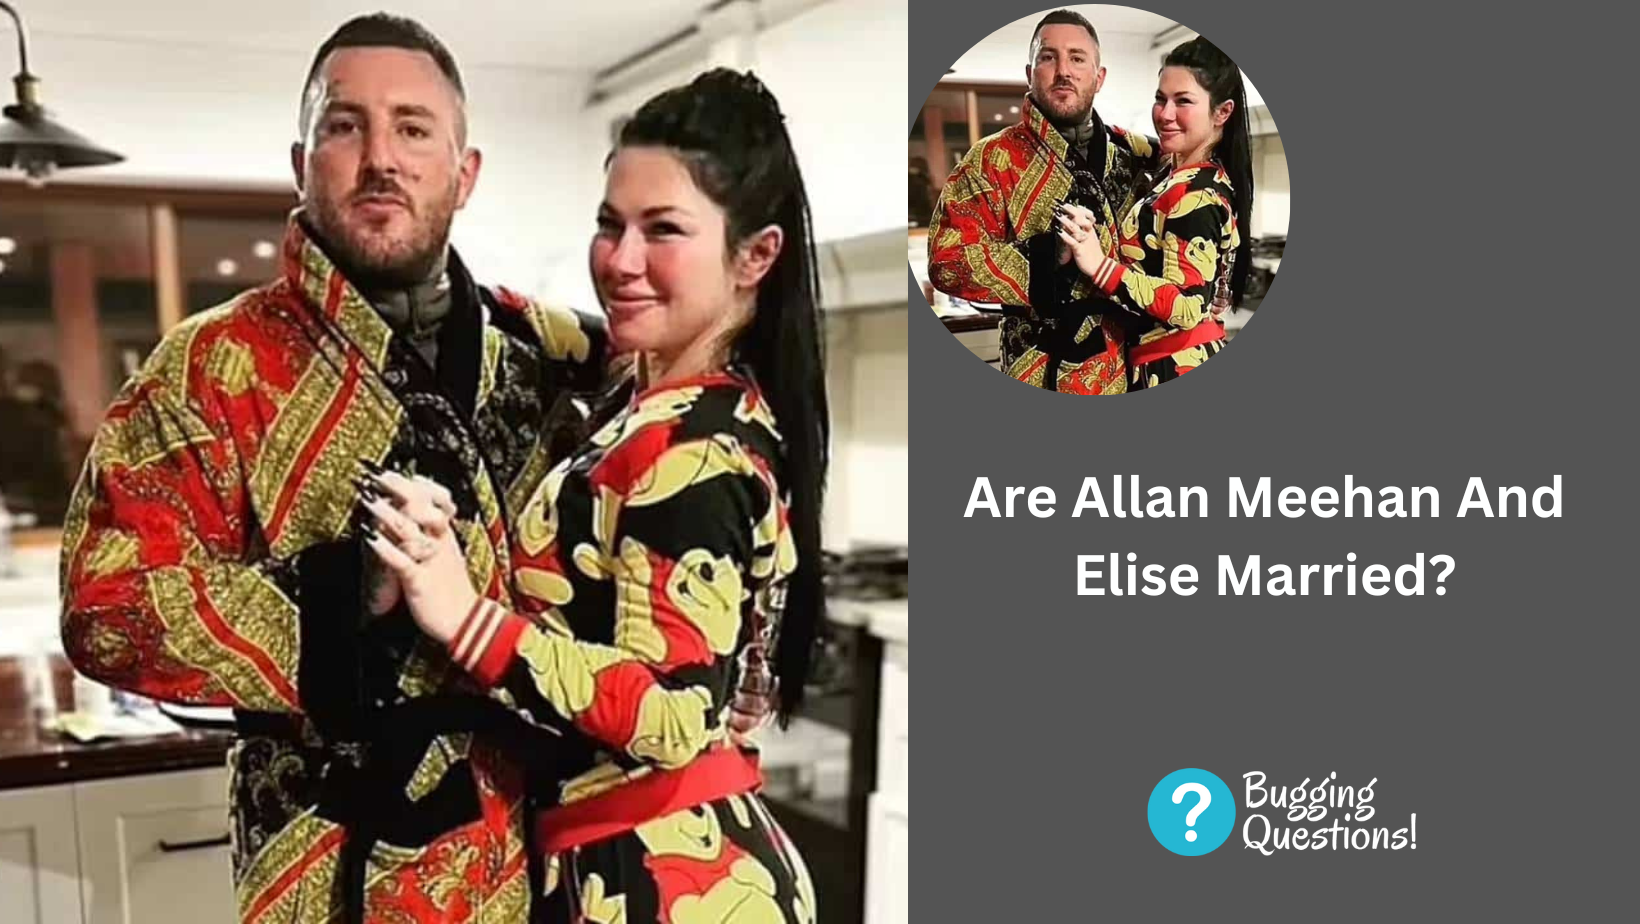 Are Allan Meehan And Elise Married?